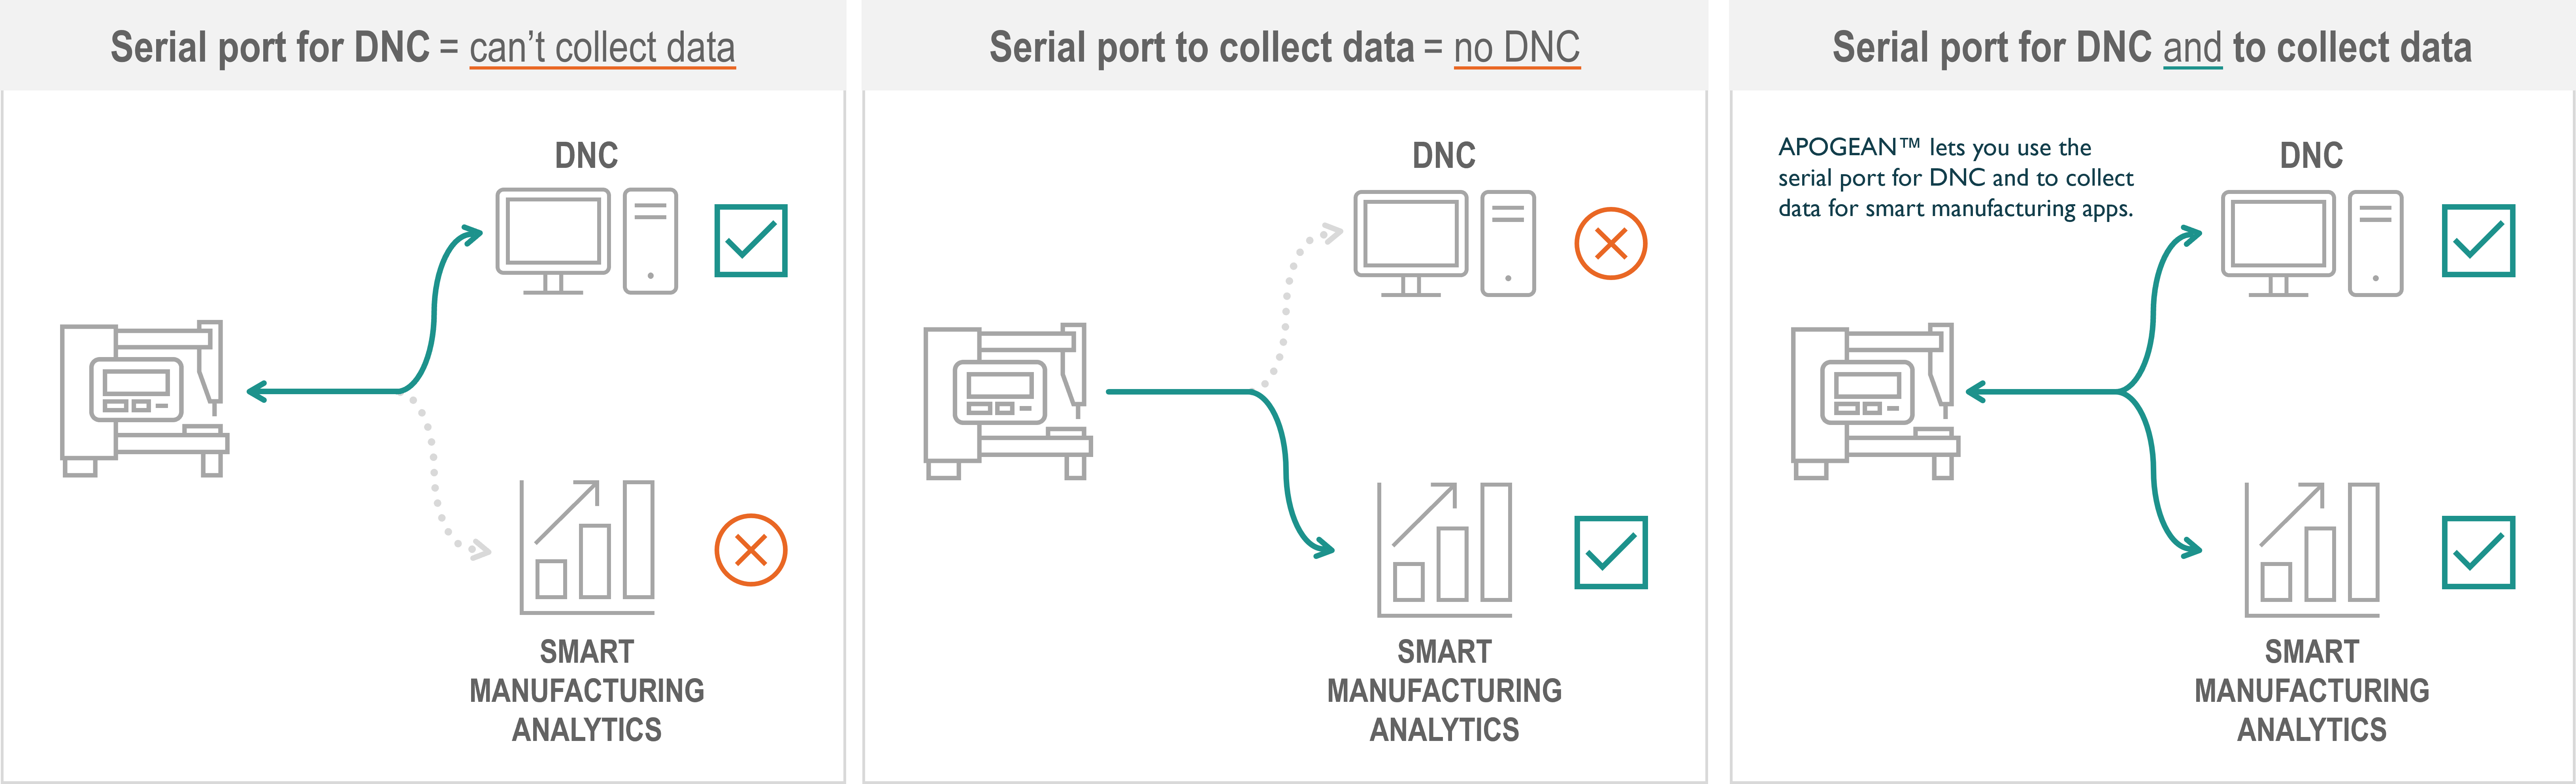 With Apogean, use serial port for DNC and to collect machine data for smart manufacturing